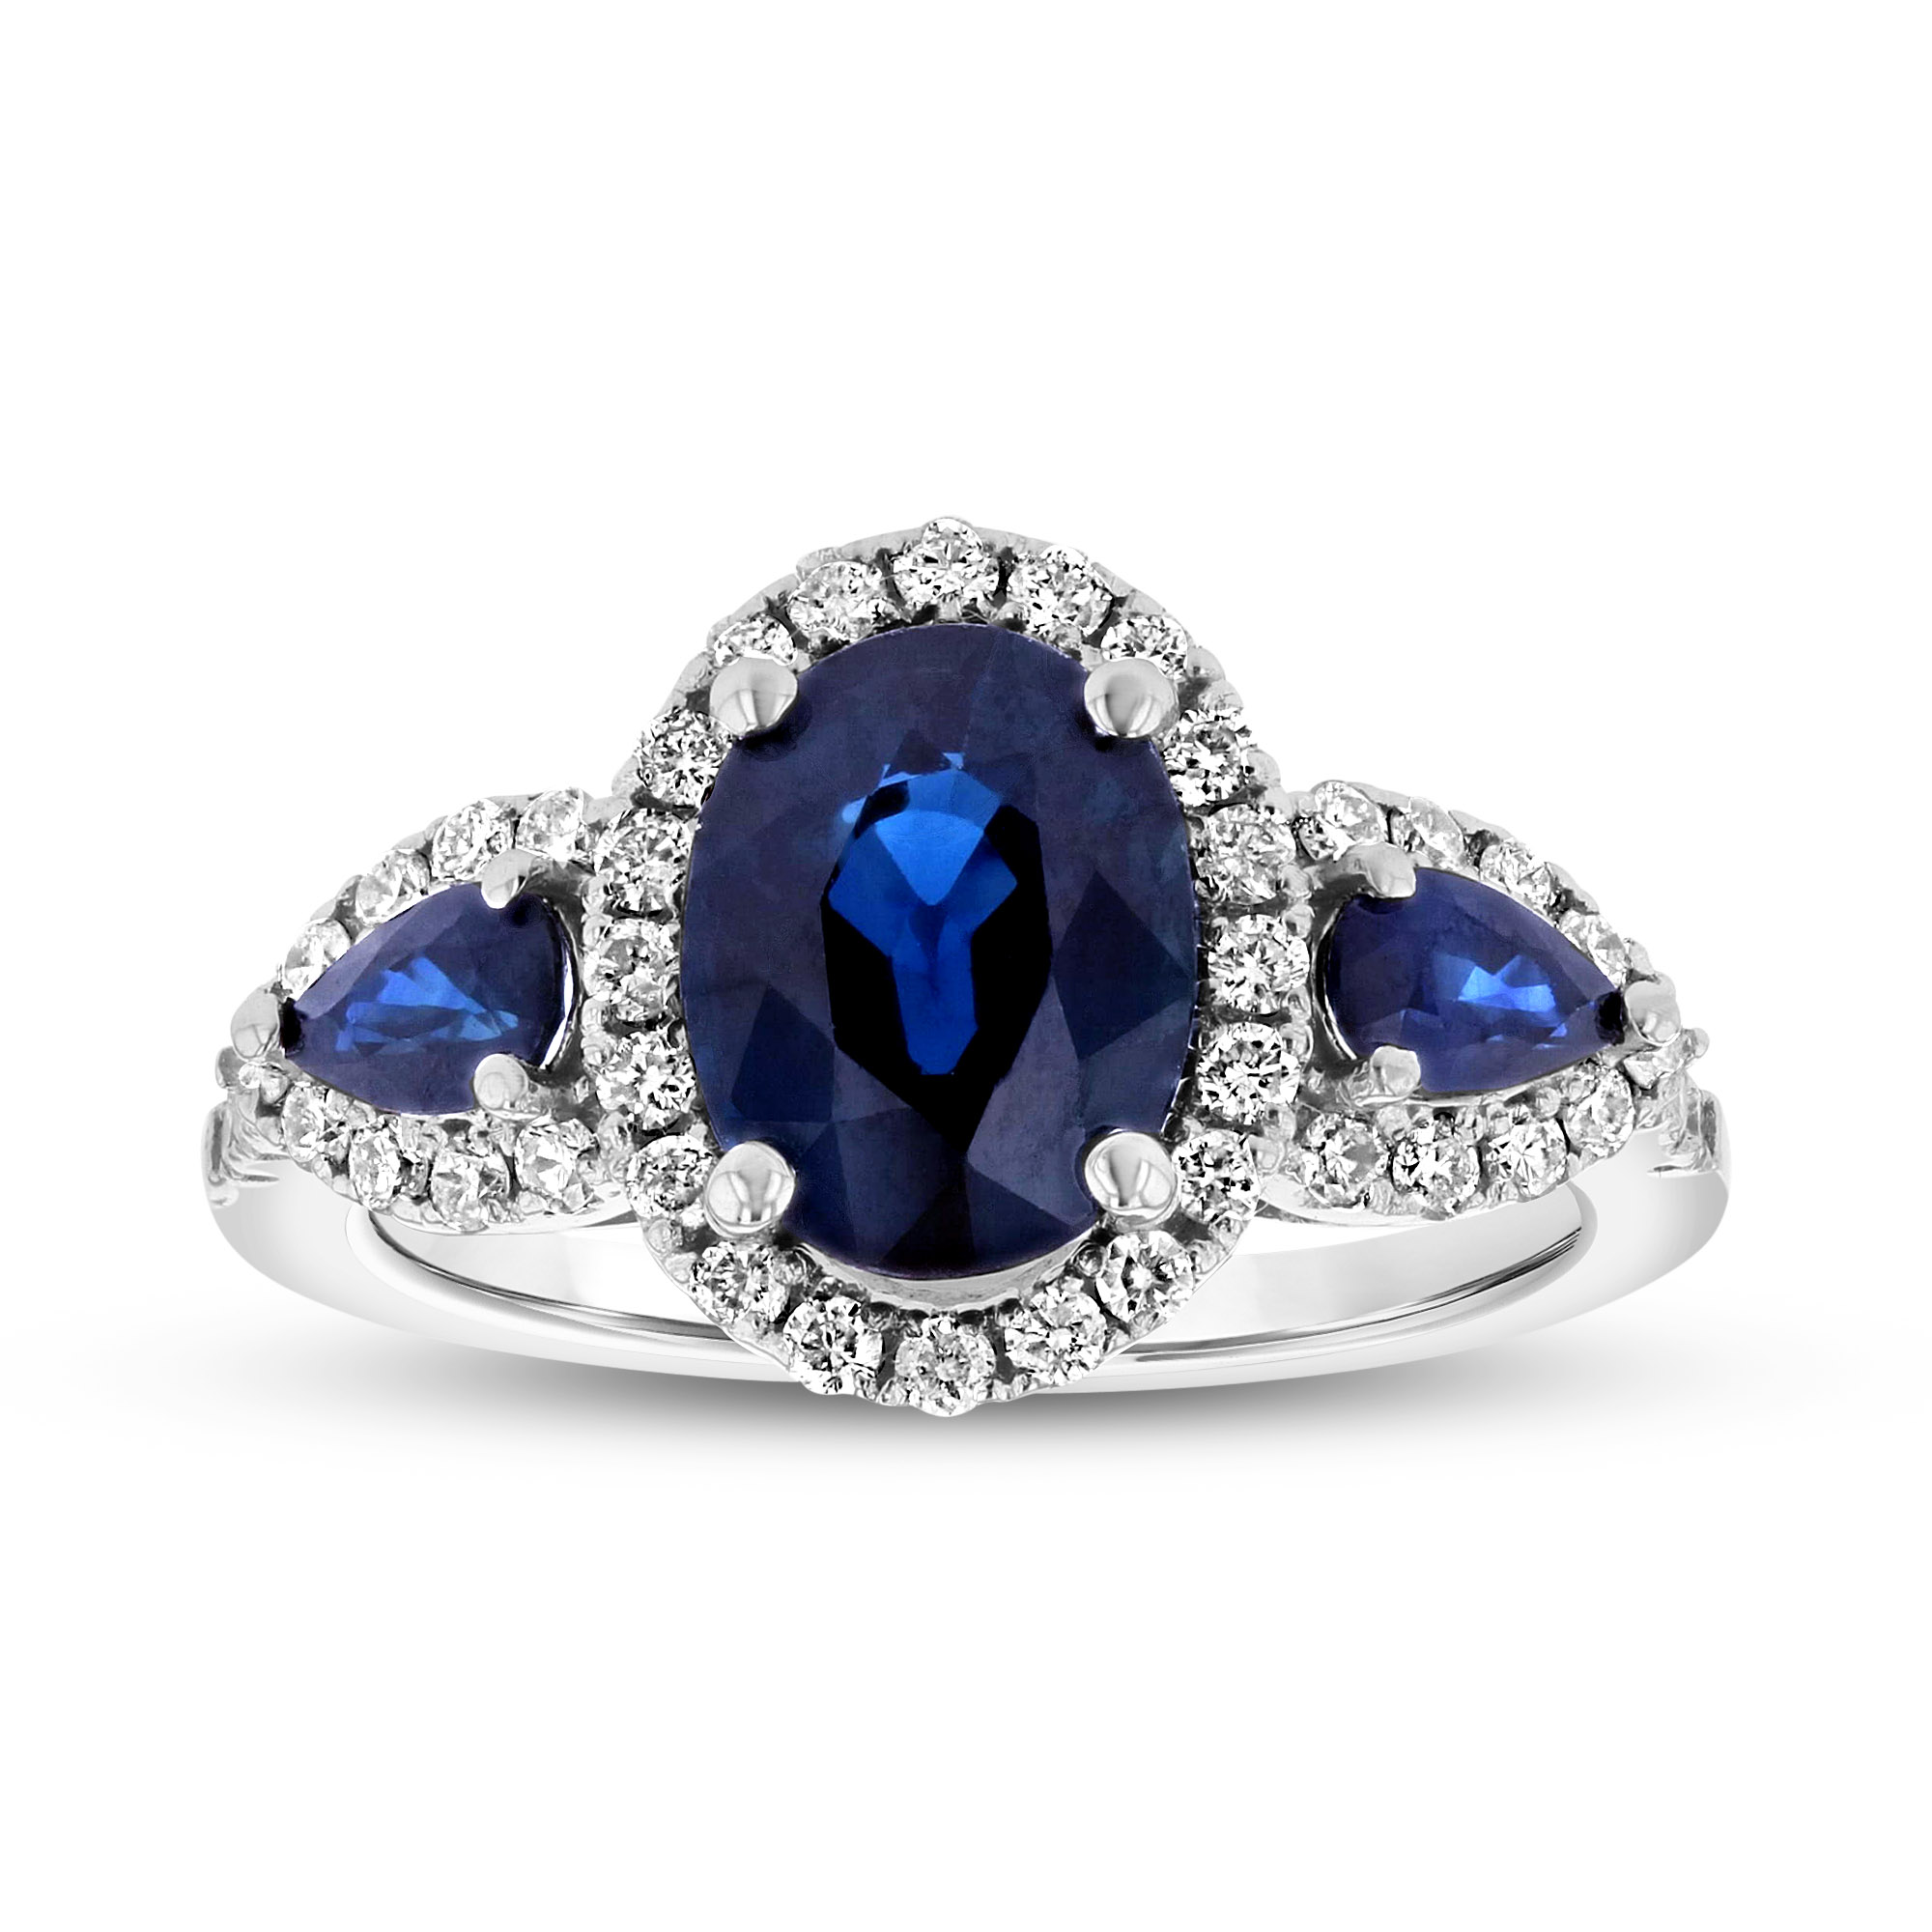 View 3.28ctw Diamond and Sapphire Ring in 14k White Gold